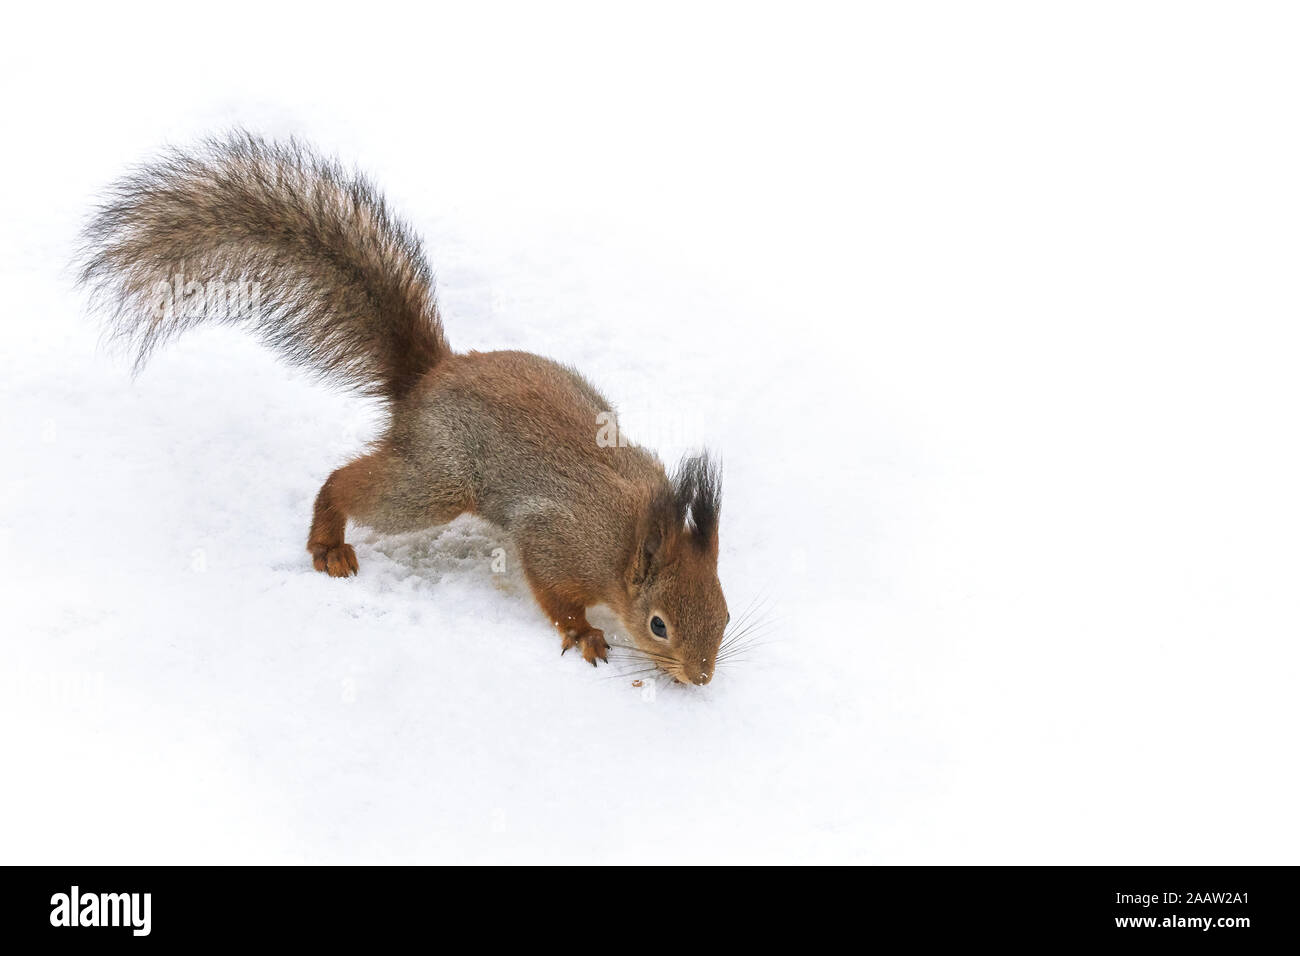 red squirrel searching for food on park ground covered with white snow Stock Photo